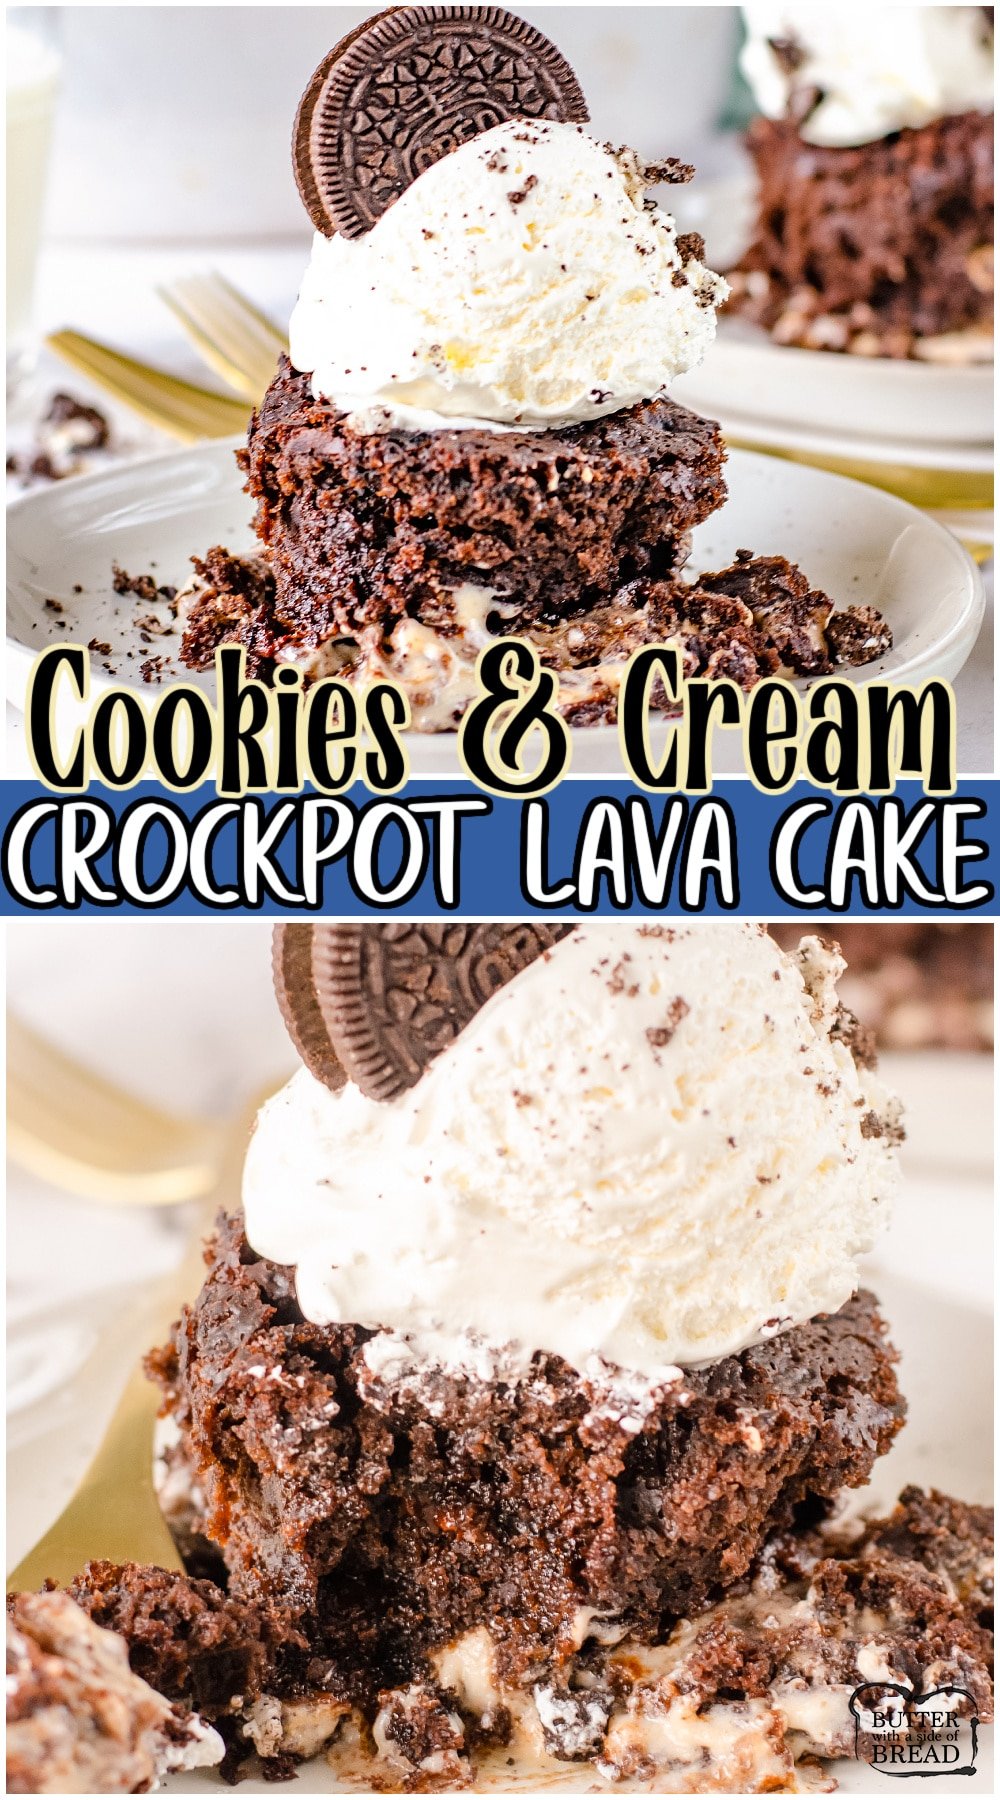 Cookies and Cream Crockpot Lava Cake is a decadent, fudgy cake recipe made completely in the slow cooker! Cake mix, pudding mix and other pantry ingredients combine to make this rich chocolate lava cake. 